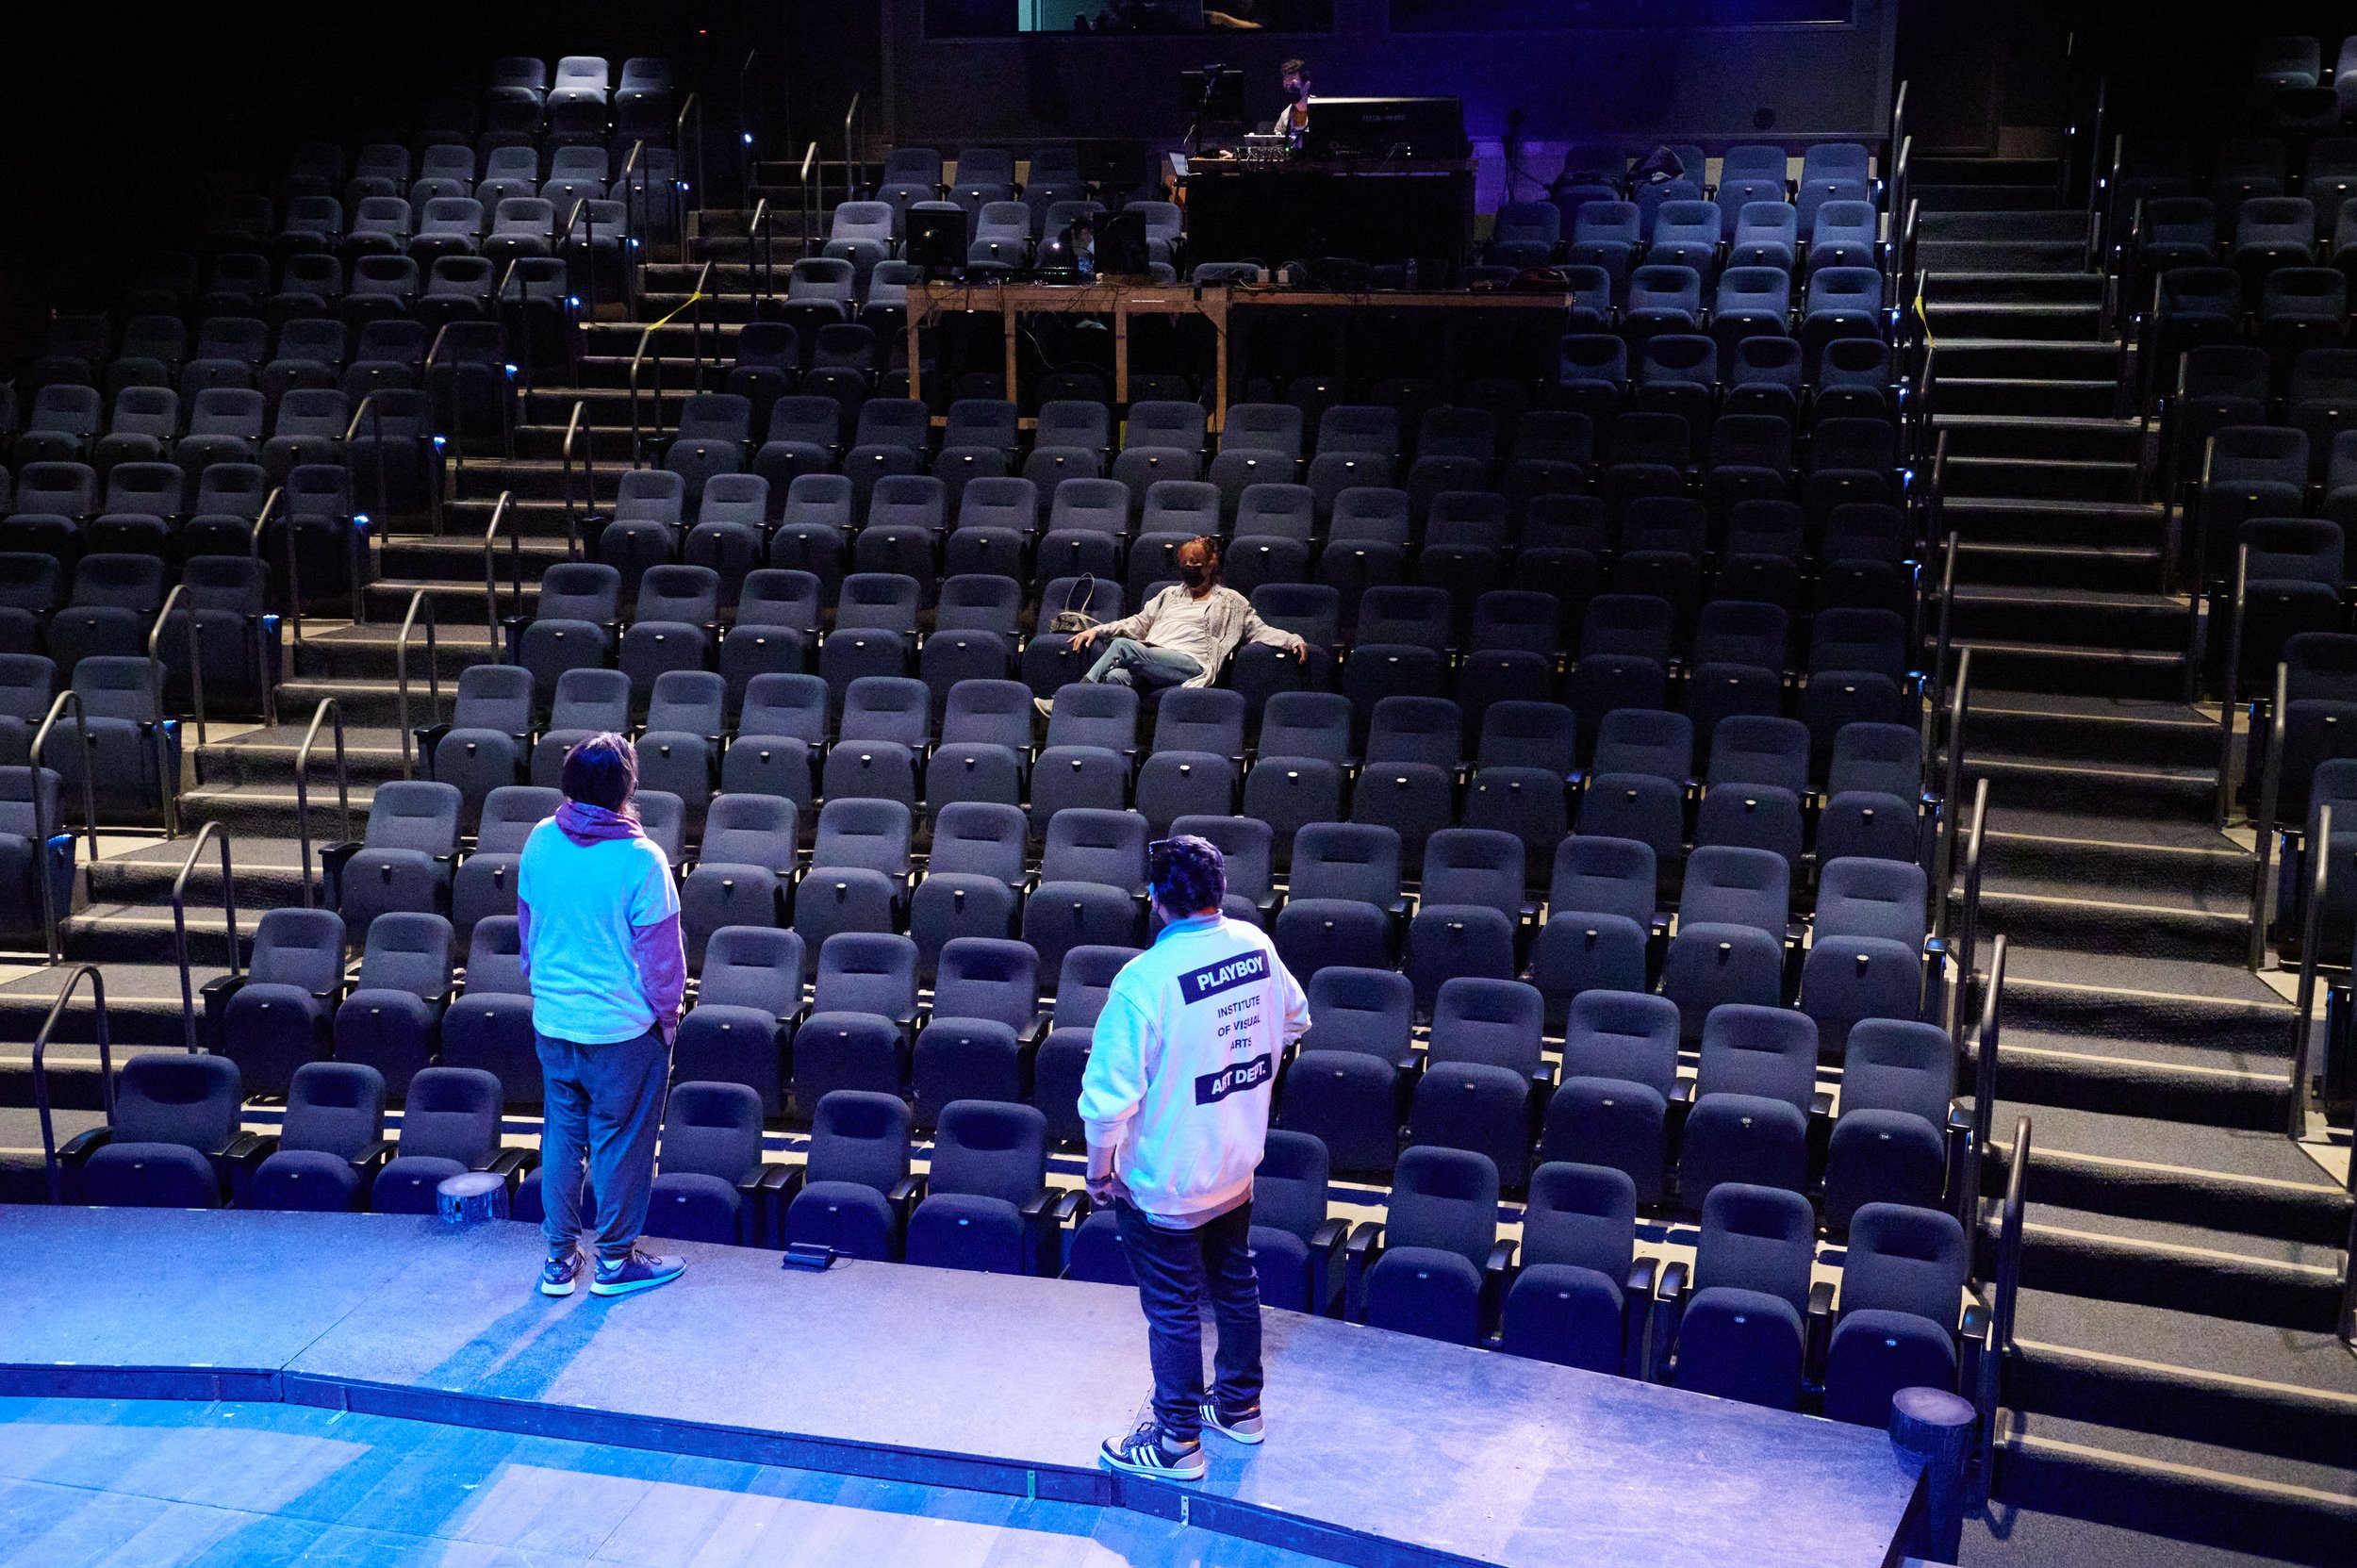  Director Terrin Adair gives instruction to Stage Manager Matthew Steward and Alexis Alapizco during rehearsal of the Santa Monica College Theatre Arts production of "Treasure Island" at the SMC Main Stage on Thursday, May 12, 2022, in Santa Monica, 